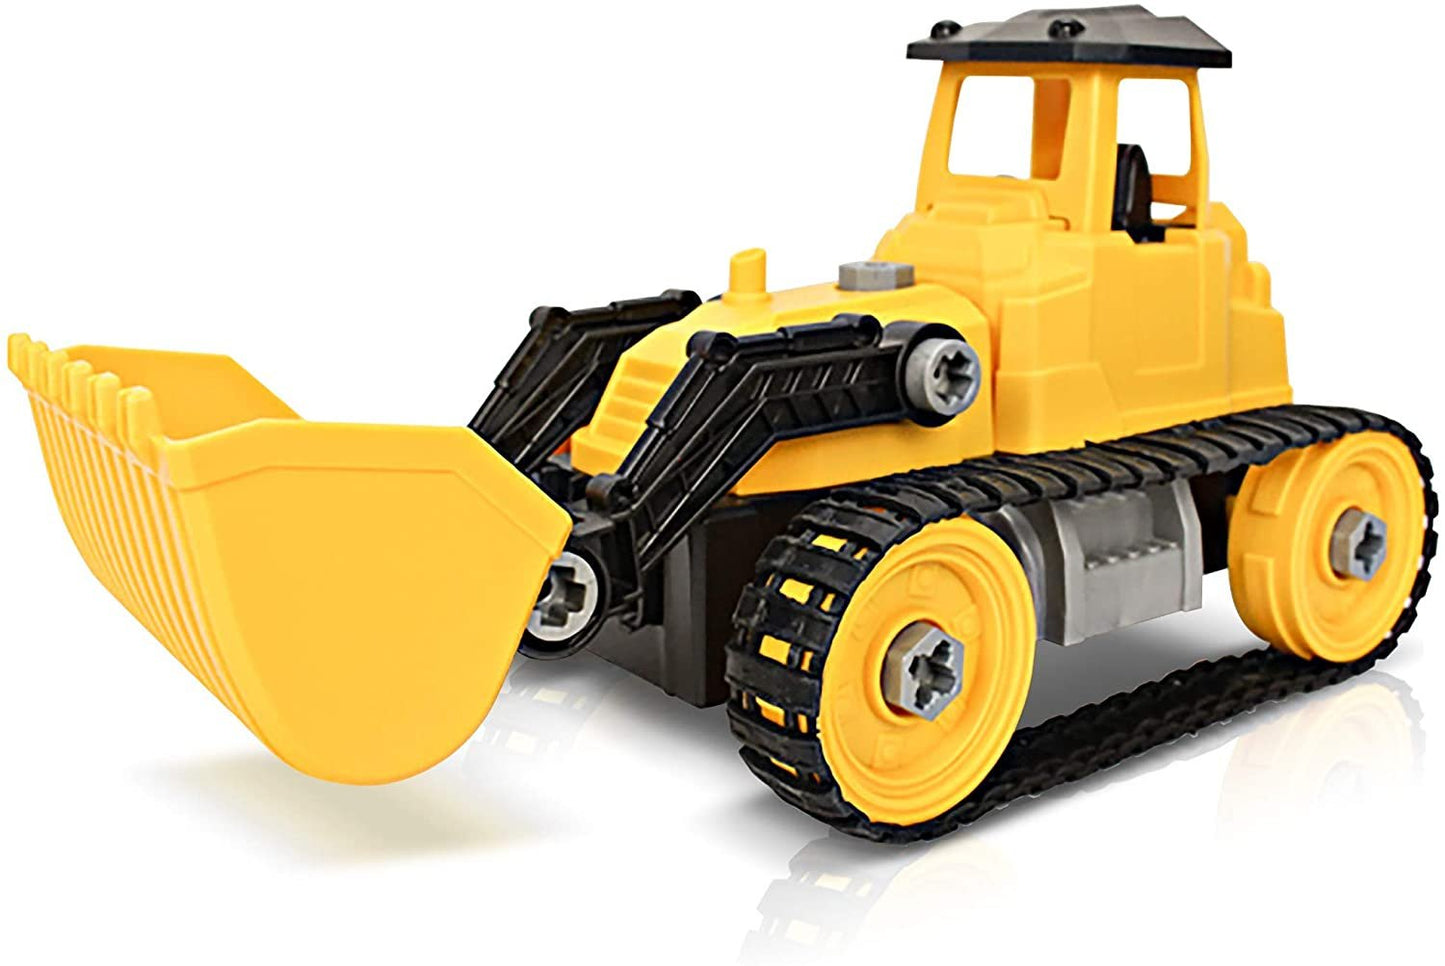 ArtCreativity Take Apart Yellow Bulldozer Toy Truck - 46 Pieces with Tools - Large Excavating Backhoe Toy - Perfect Digger Toy and Great Birthday Gift Idea for Boys and Girls Ages 3+